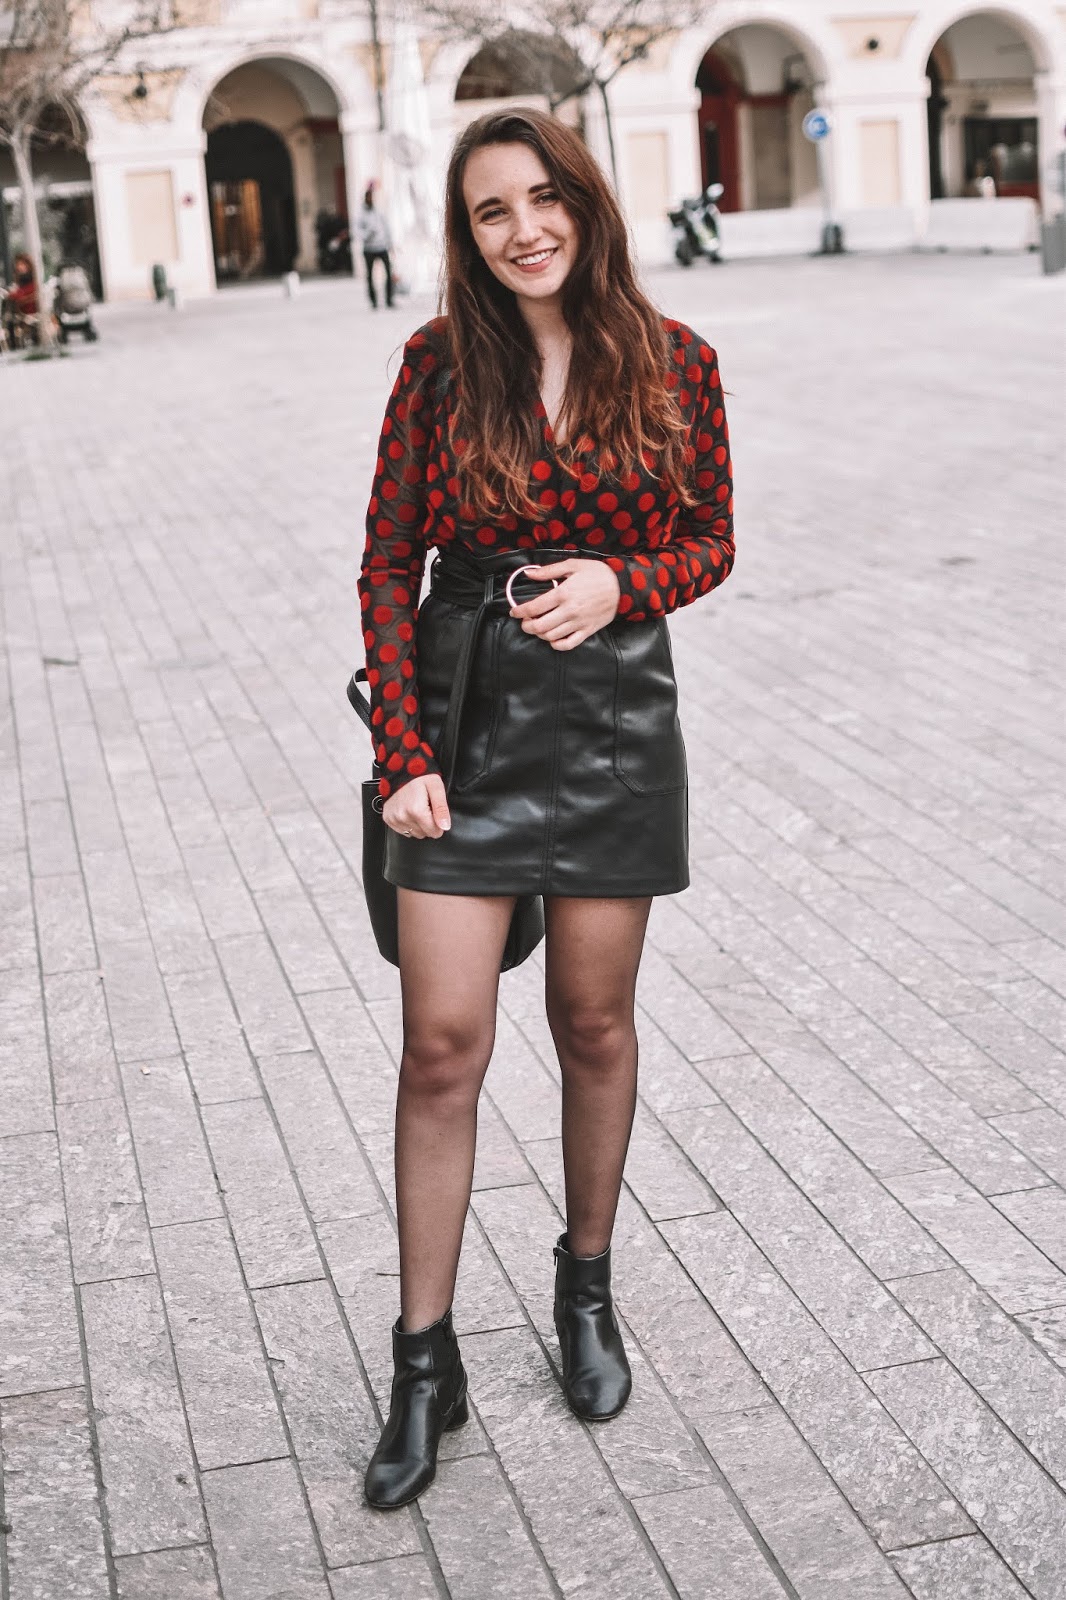 LOOK FOR VALENTINE'S DAY - Fashionmylegs : The tights and hosiery blog